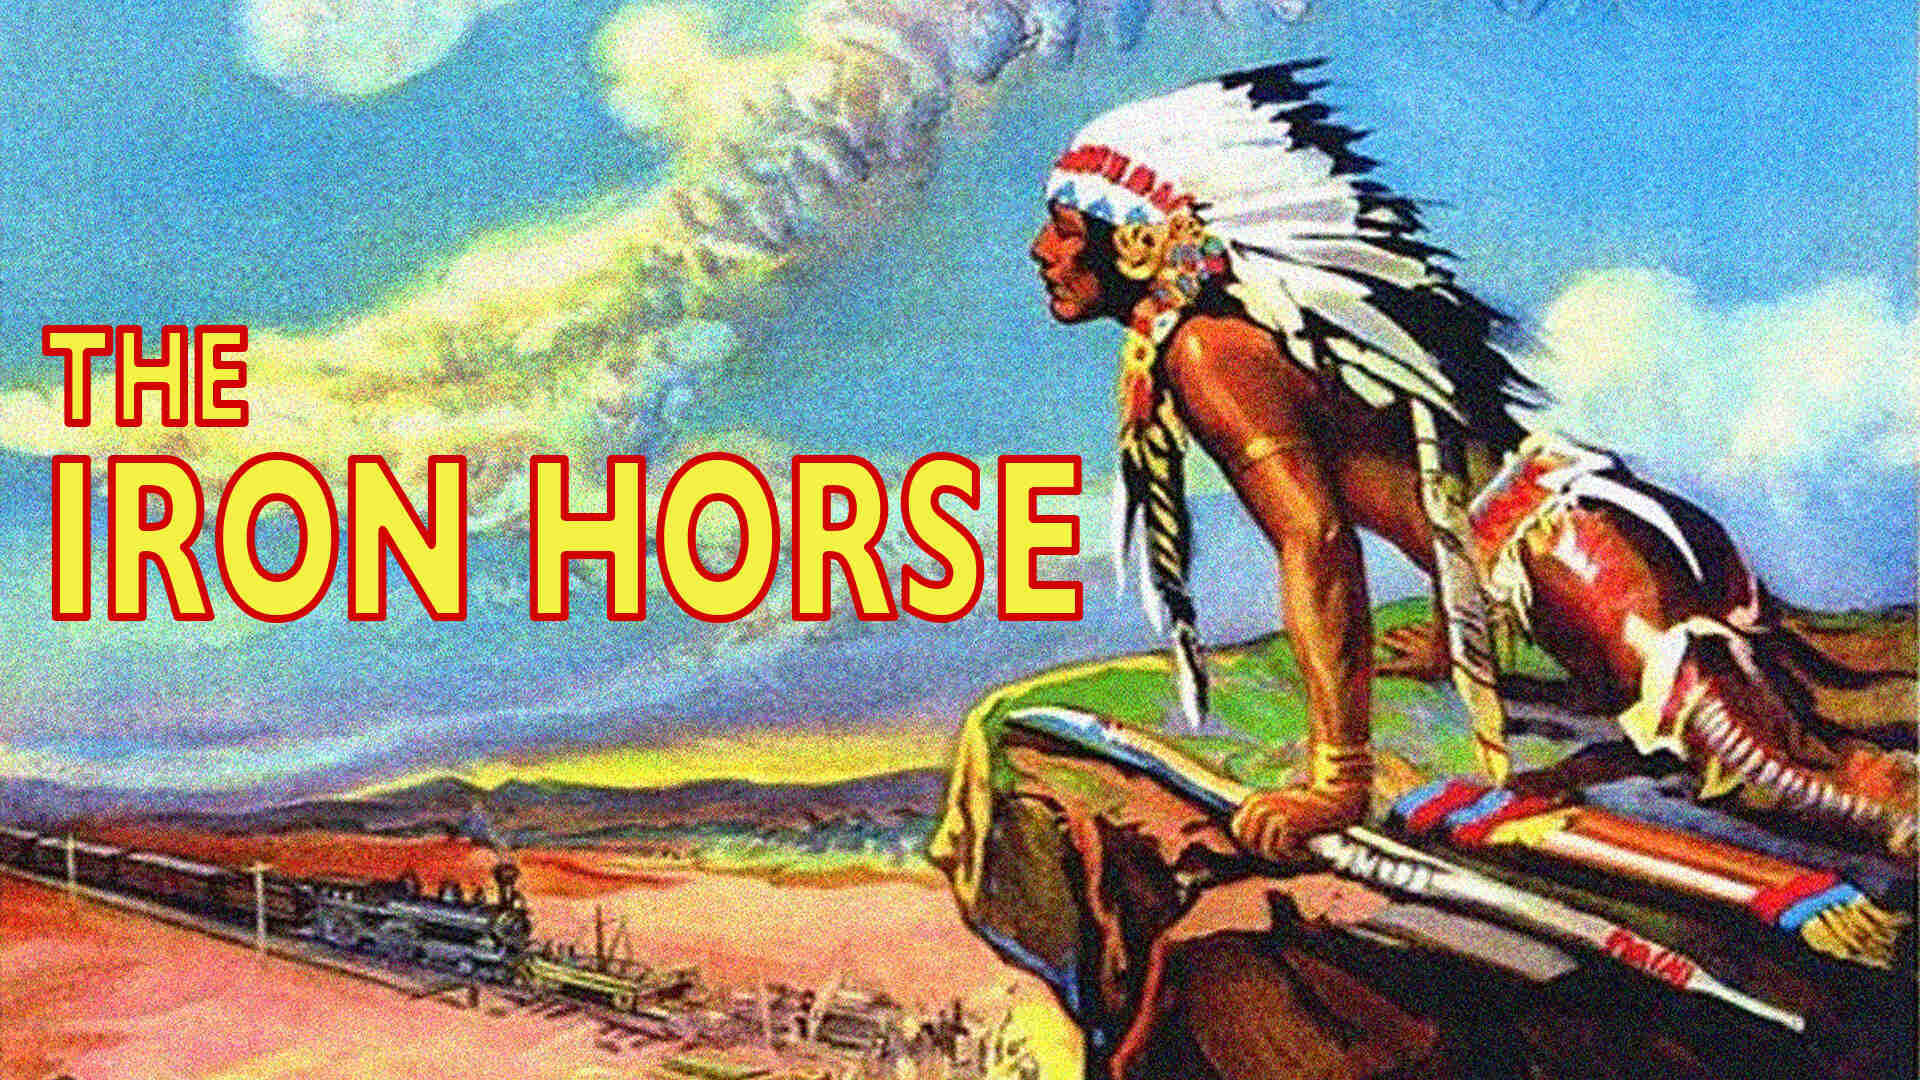 47-facts-about-the-movie-the-iron-horse